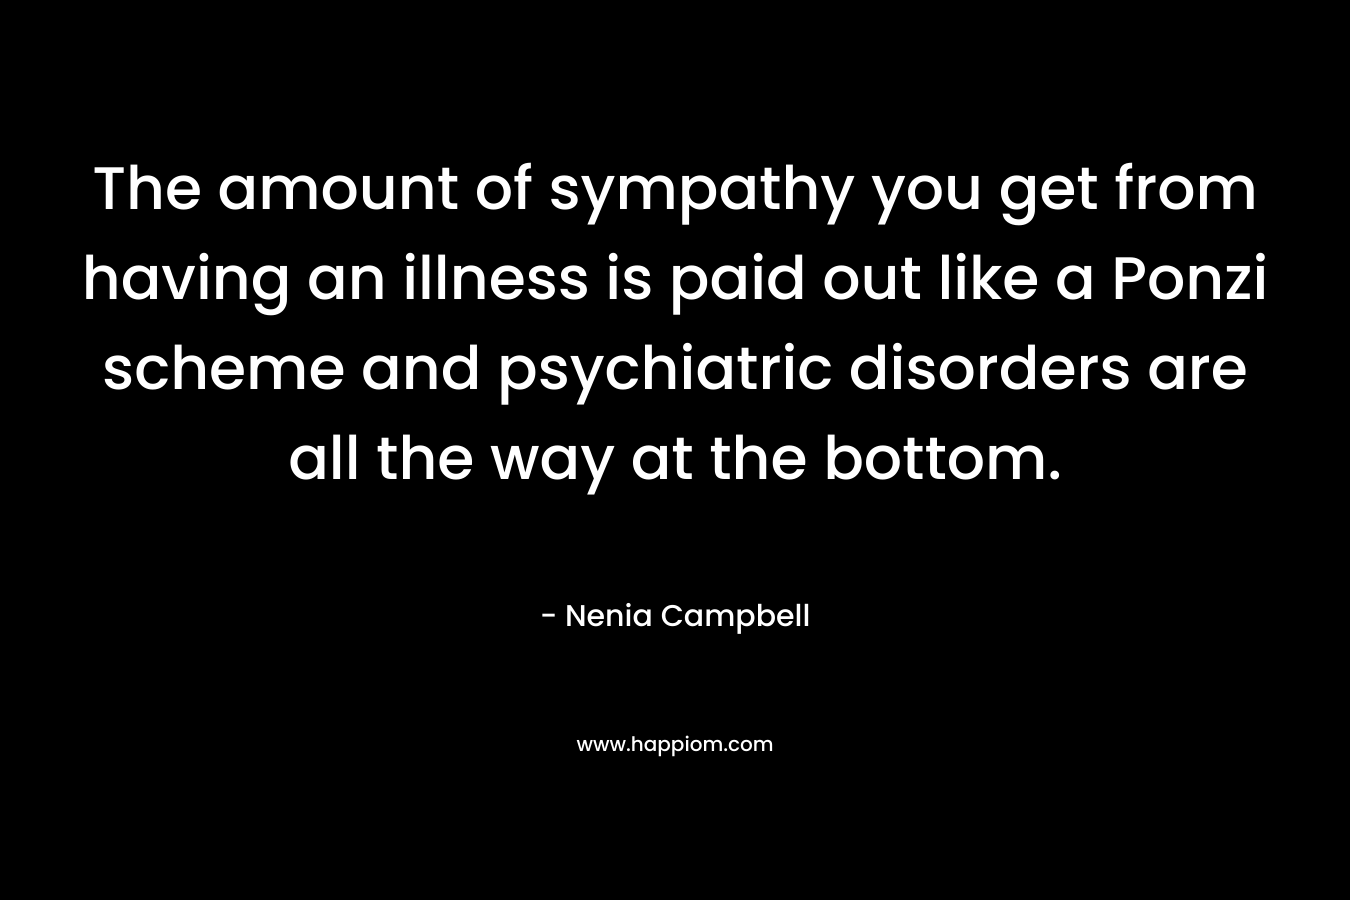 The amount of sympathy you get from having an illness is paid out like a Ponzi scheme and psychiatric disorders are all the way at the bottom. – Nenia Campbell